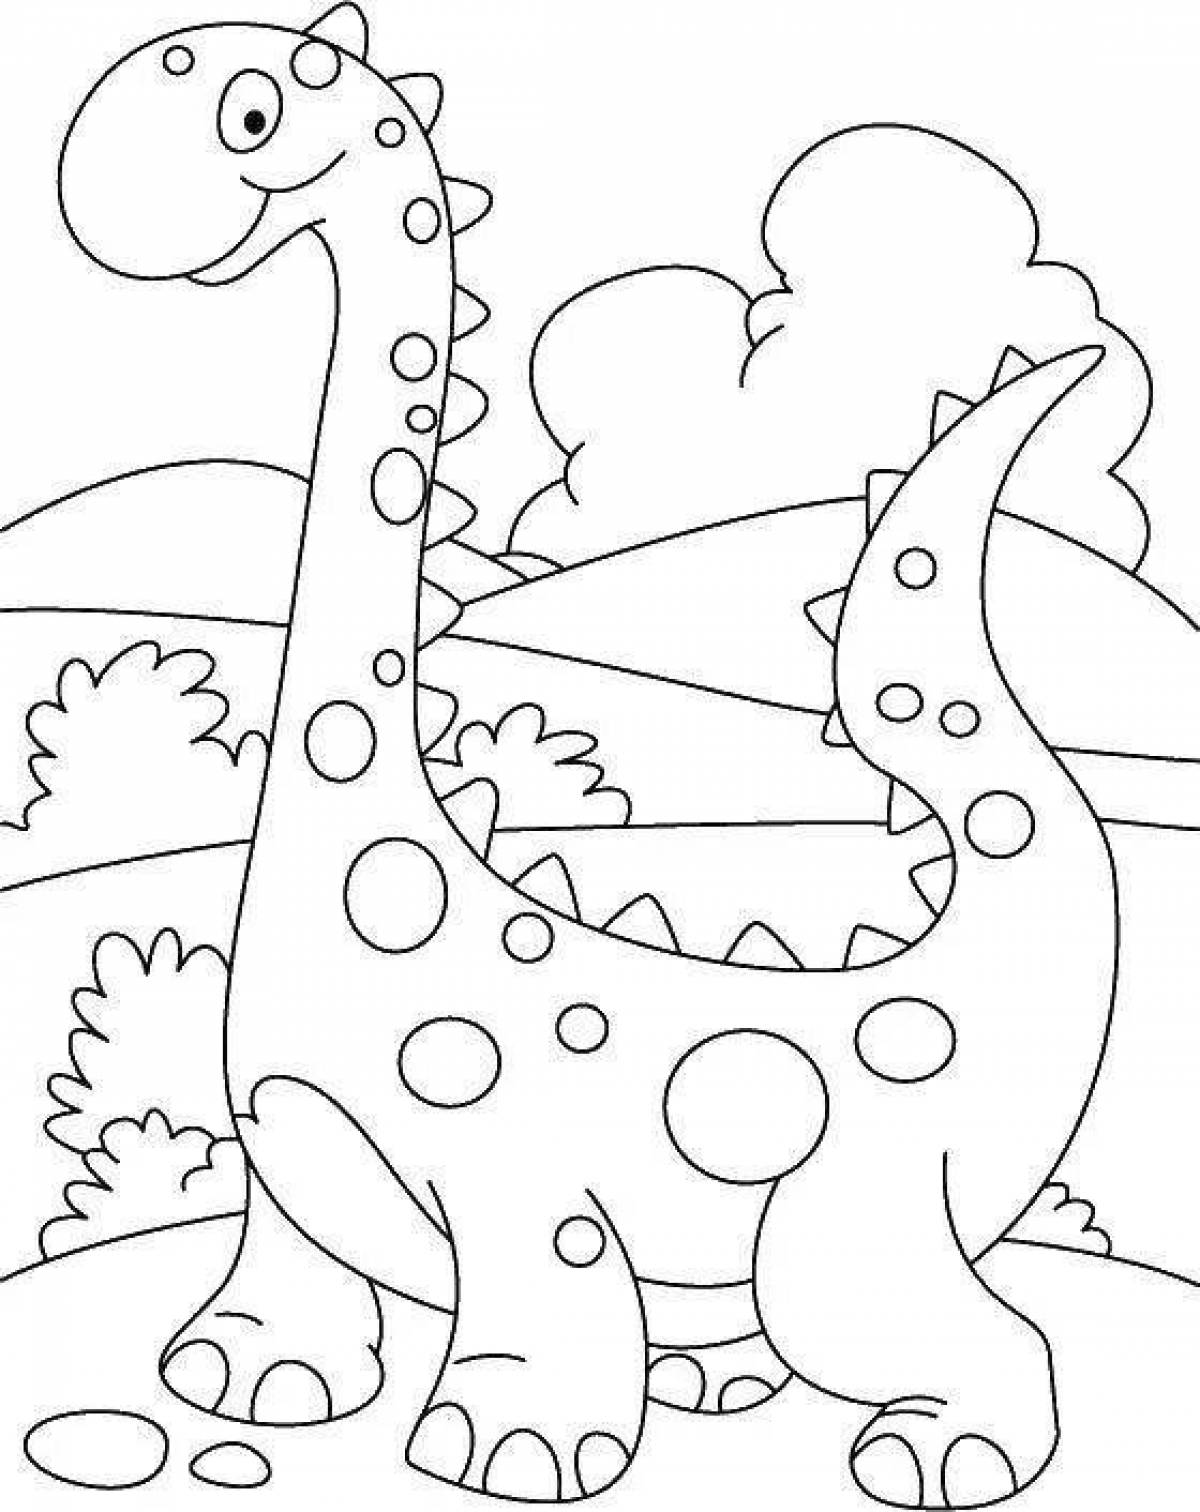 Amazing dino coloring page